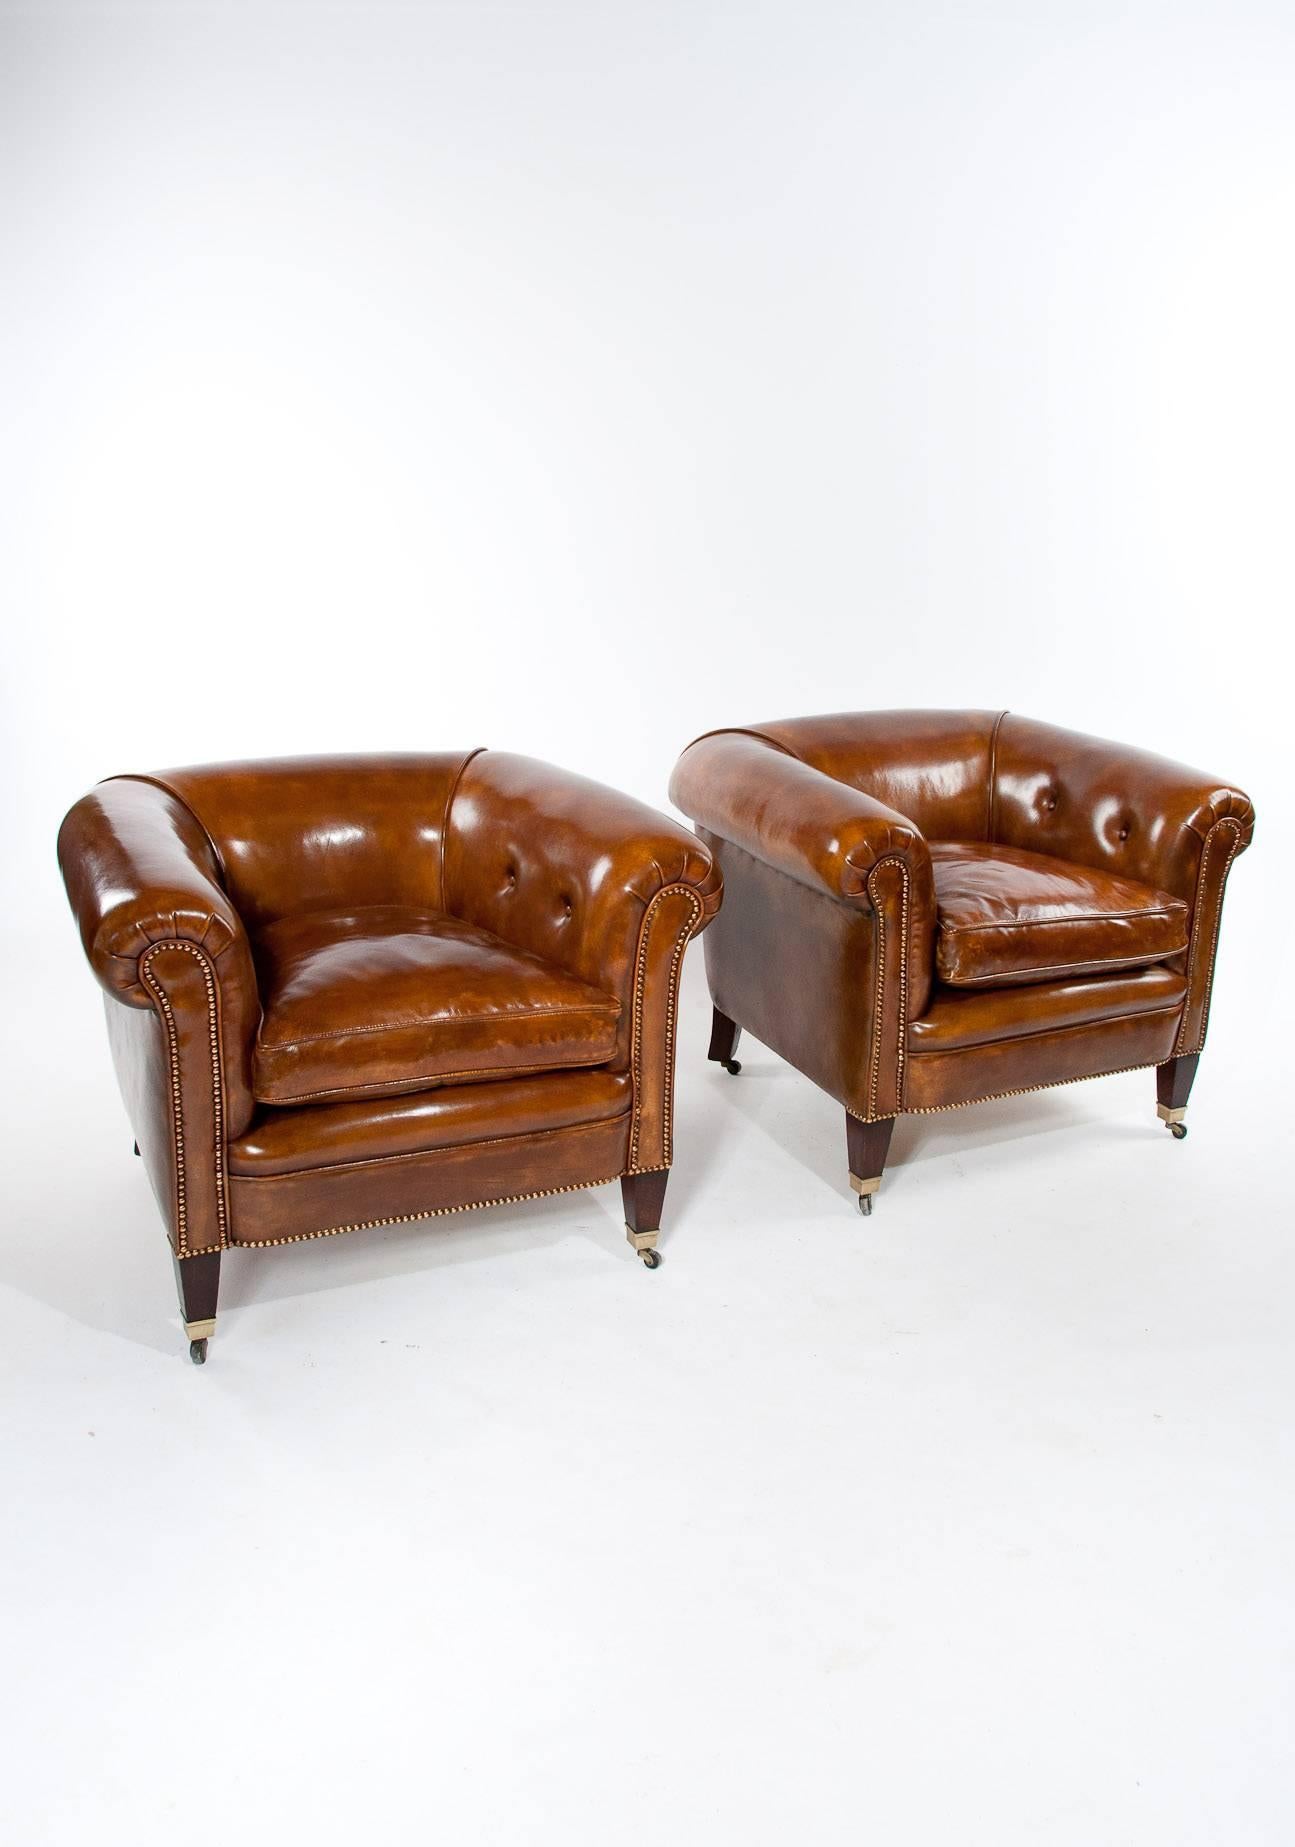 A very good quality pair of antique leather tub armchairs dating to circa 1910s-1920s. 

This rare pair of tub shaped armchairs have been upholstered in a fine quality hand dyed tan leather having shallow buttoned sides and deep feather down